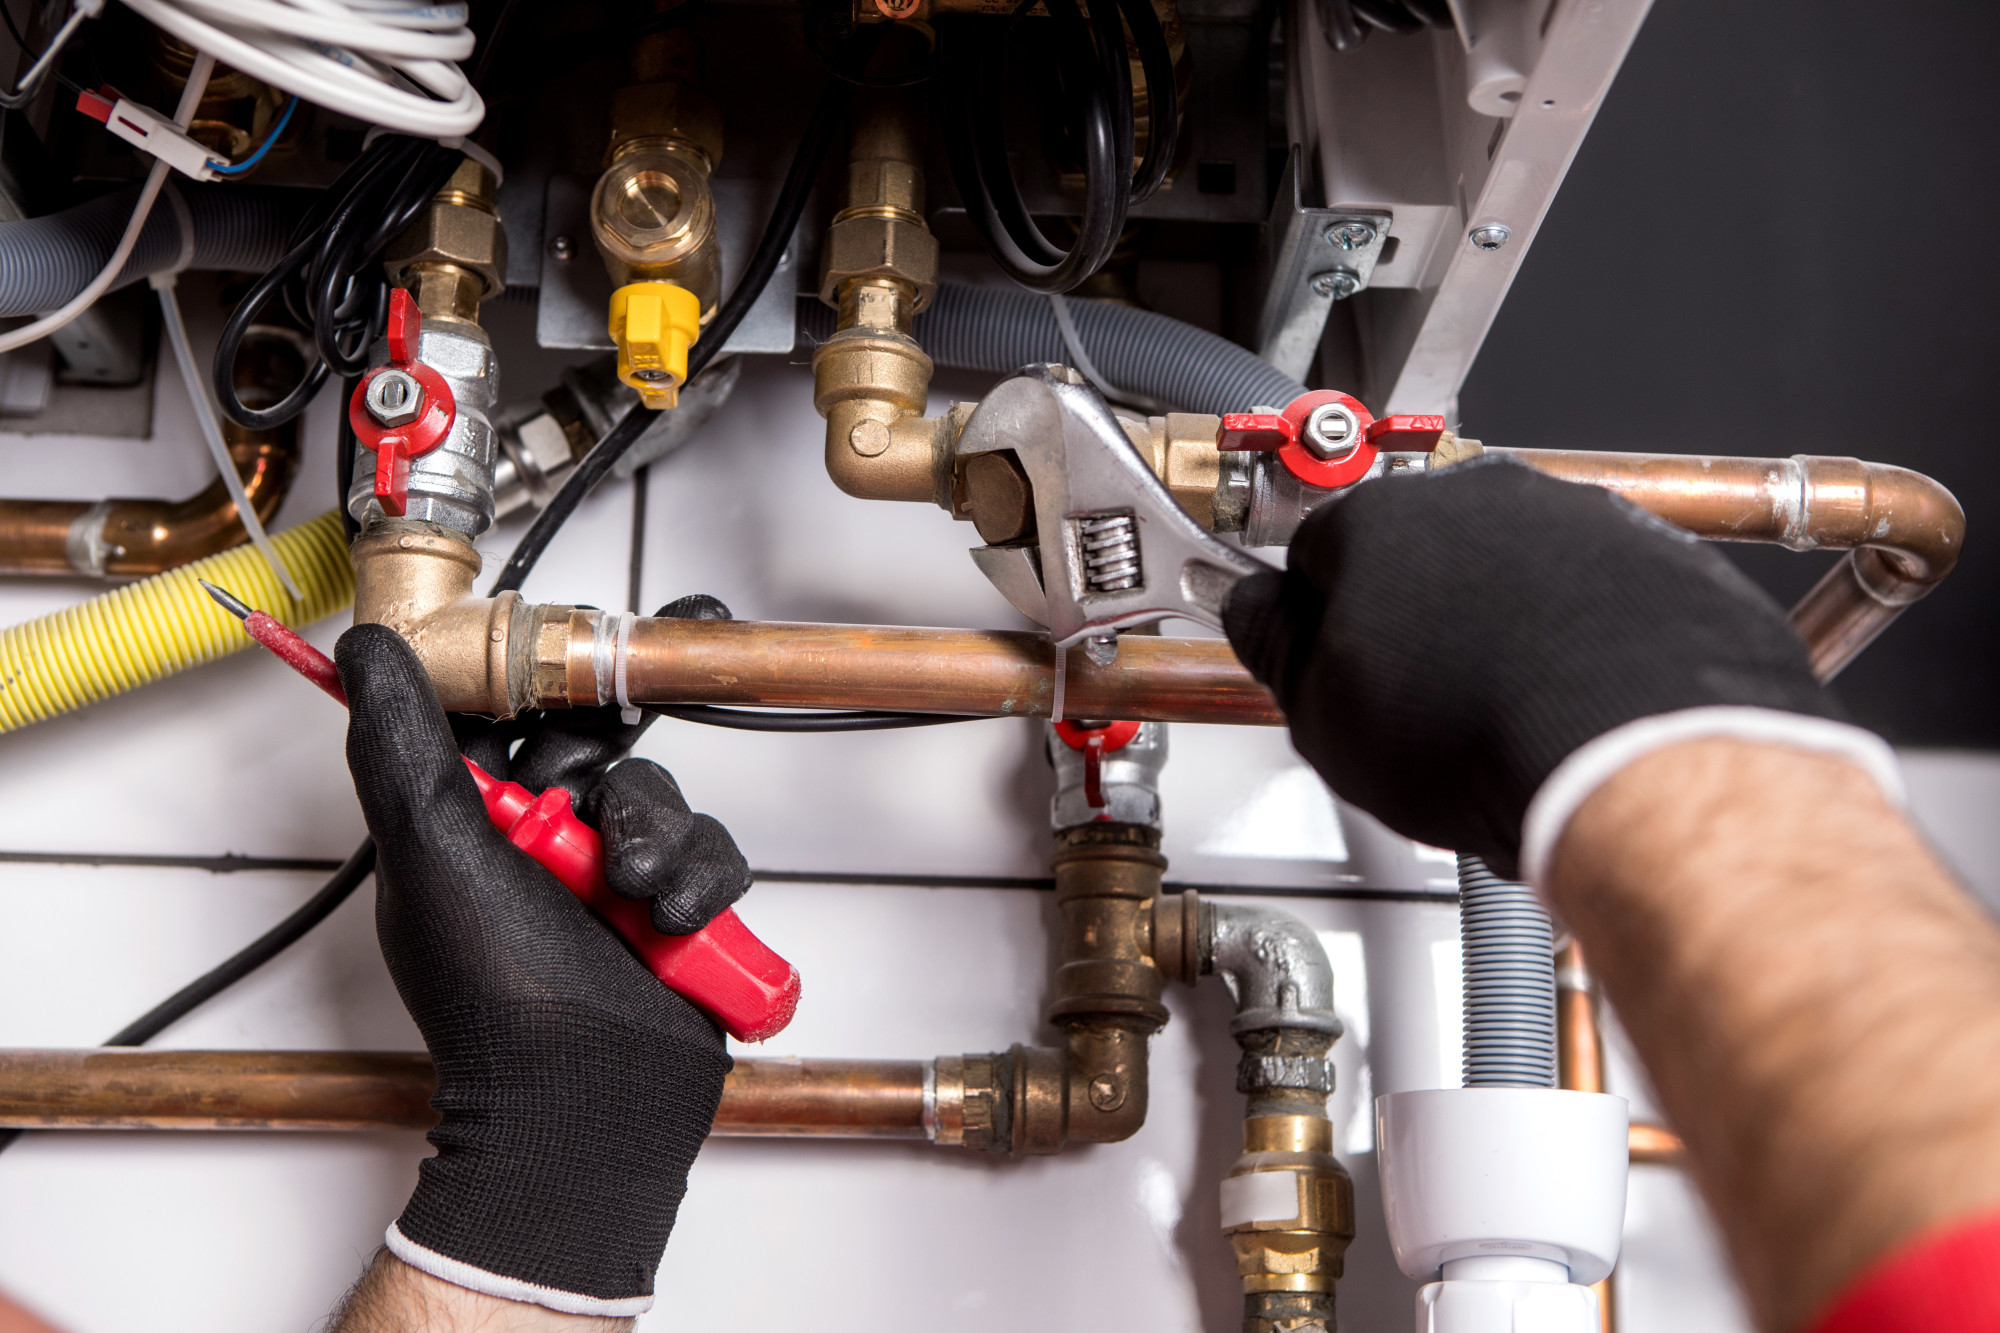 If you have a leaky pipe in your home, it's important that you remain calm. We are here to walk you through the important things to do.